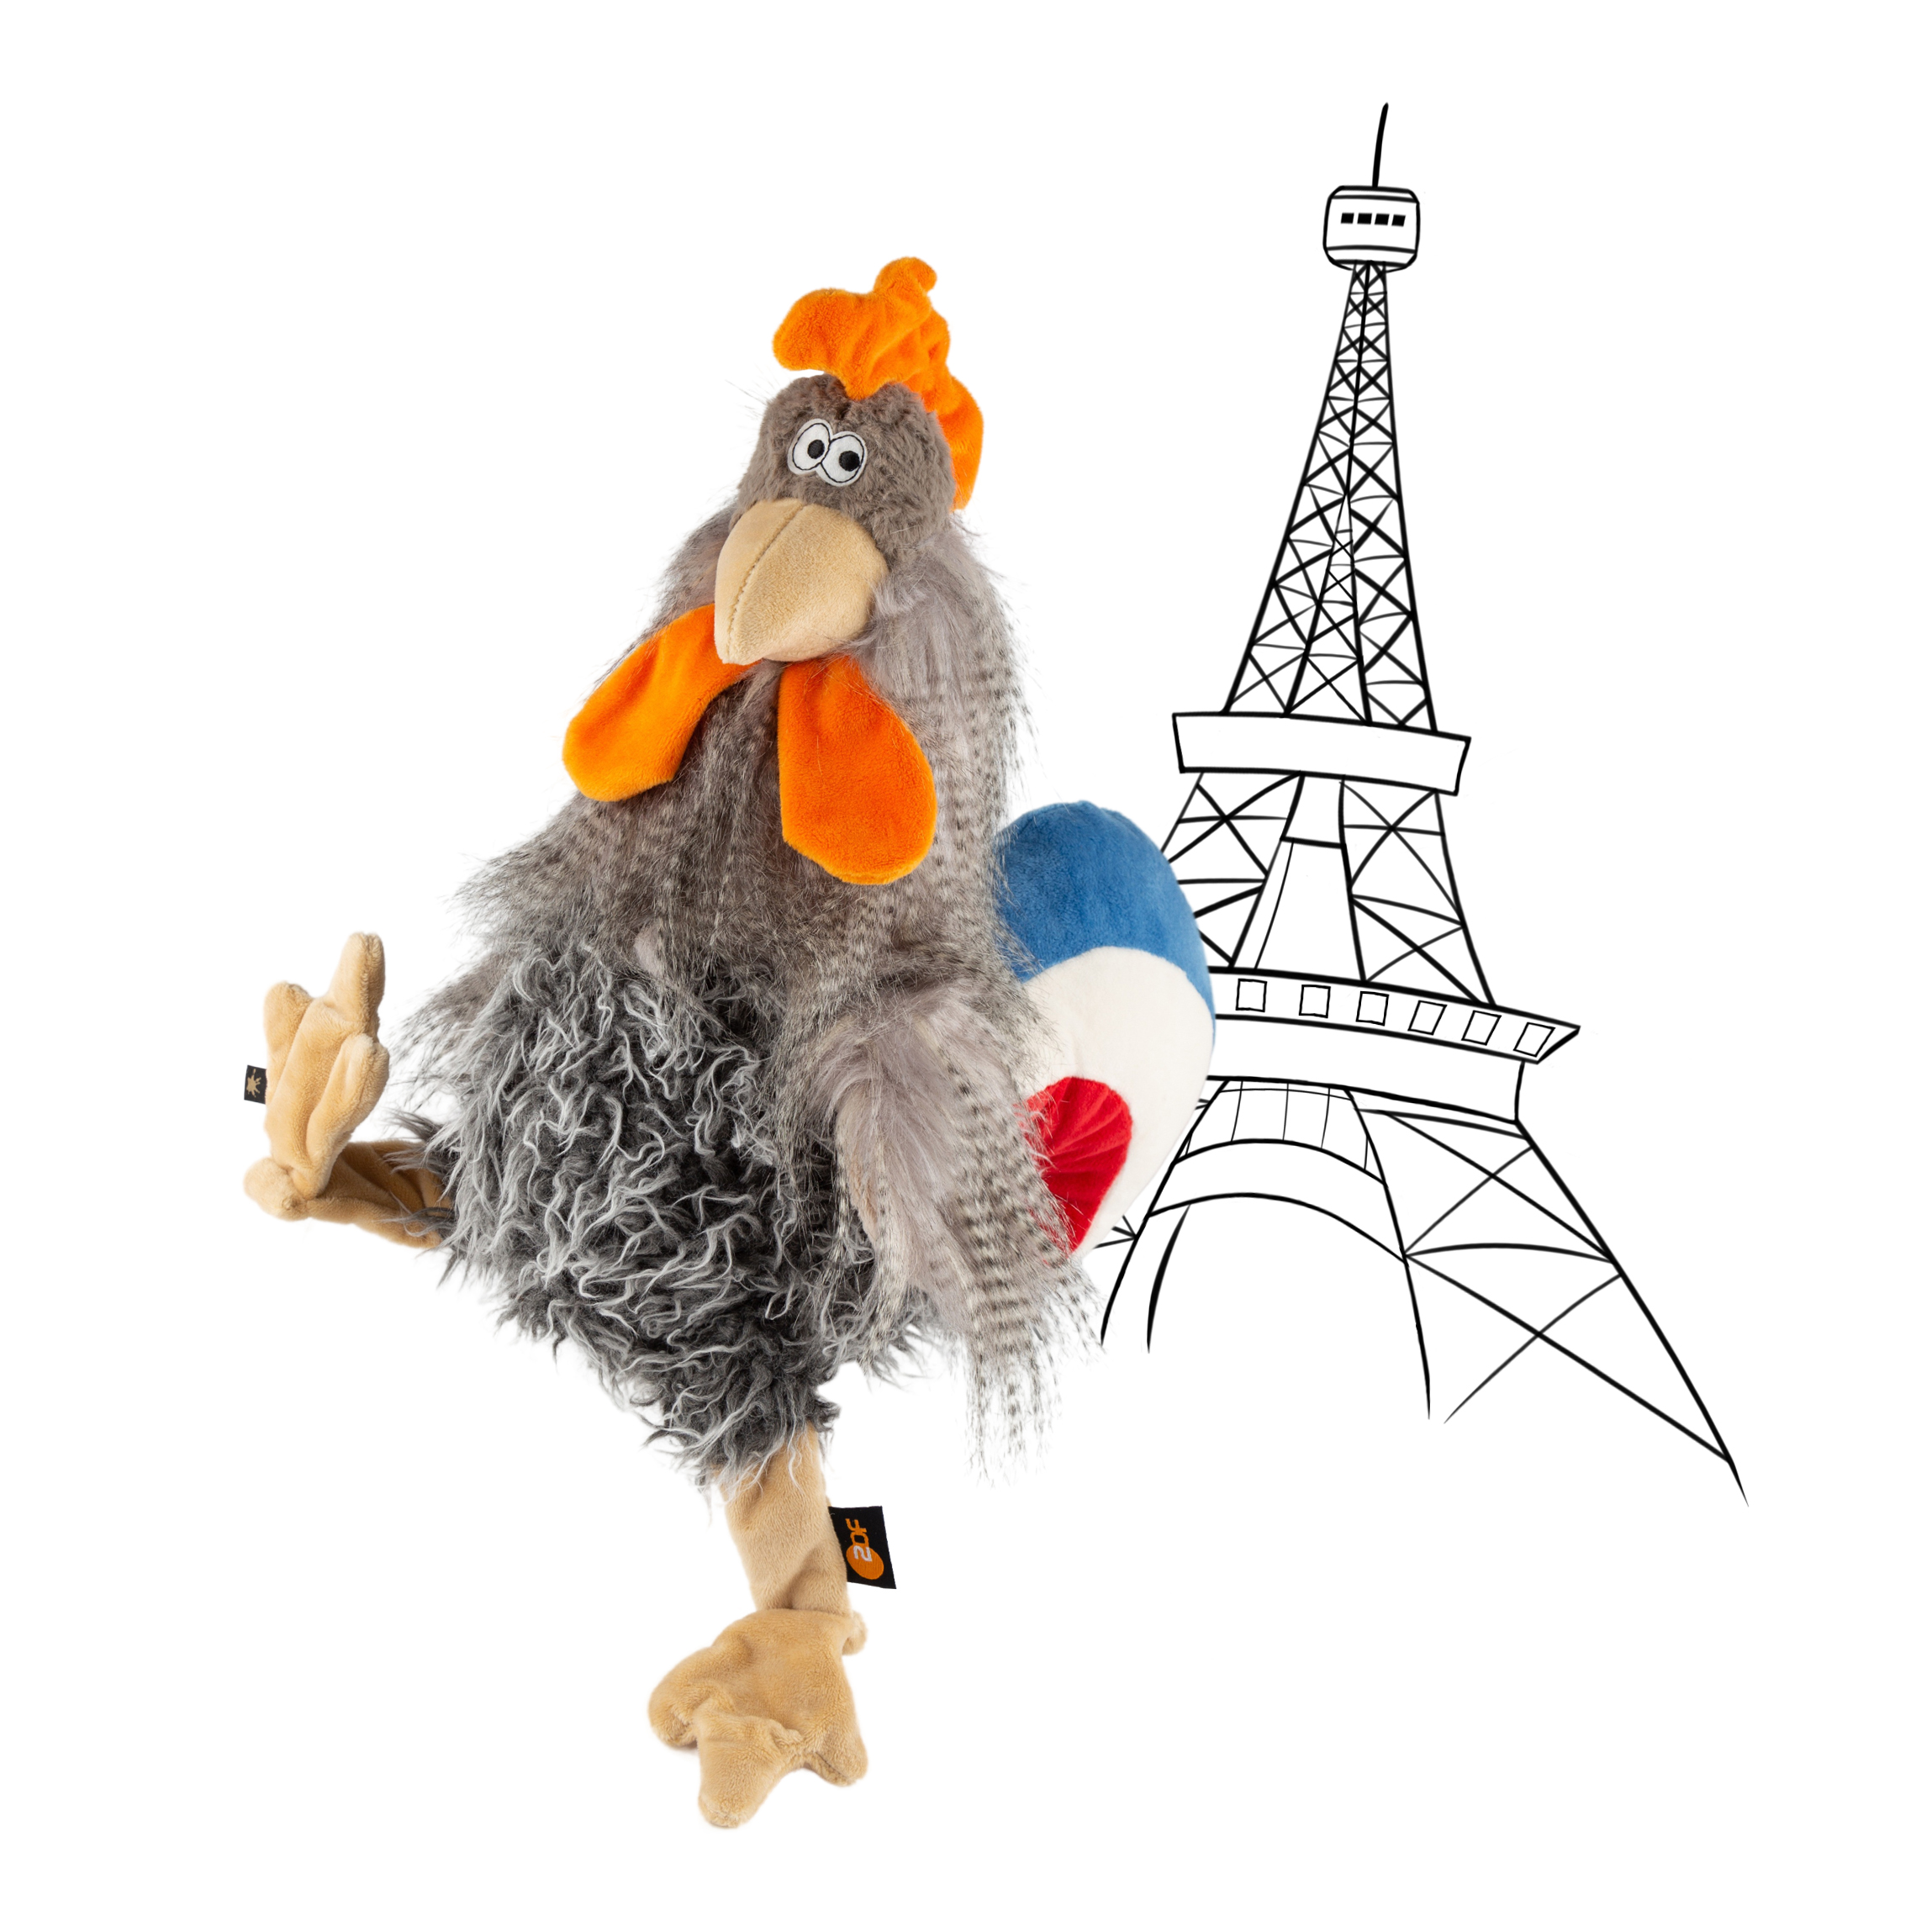 Plush rooster for TV, ZDF olympic broadcast studio Paris